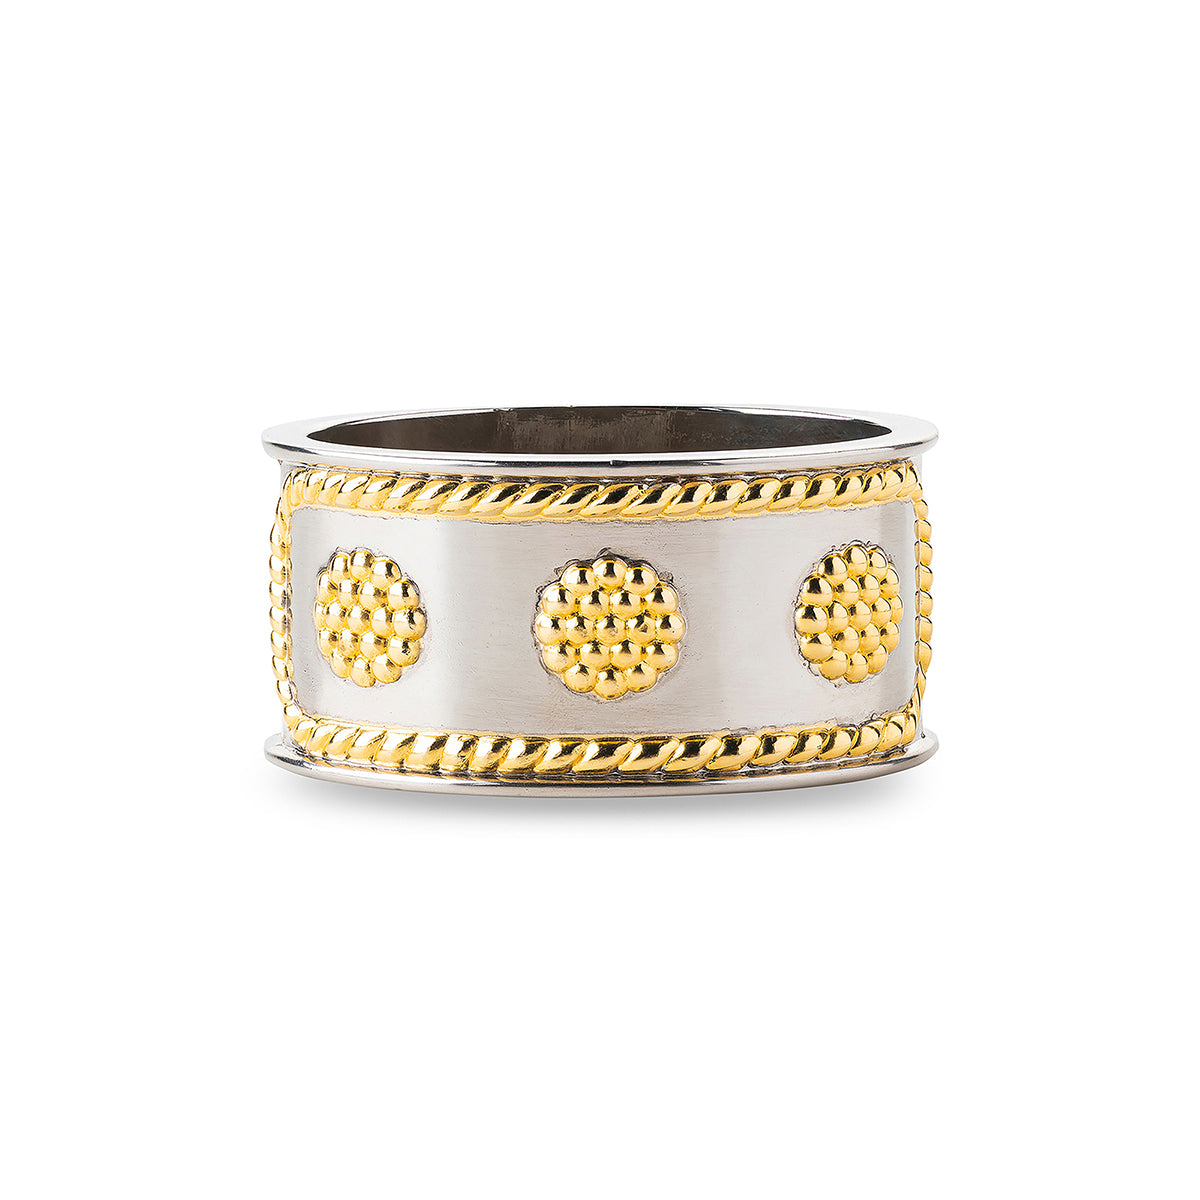 Berry & Thread Gold Silver Napkin Ring